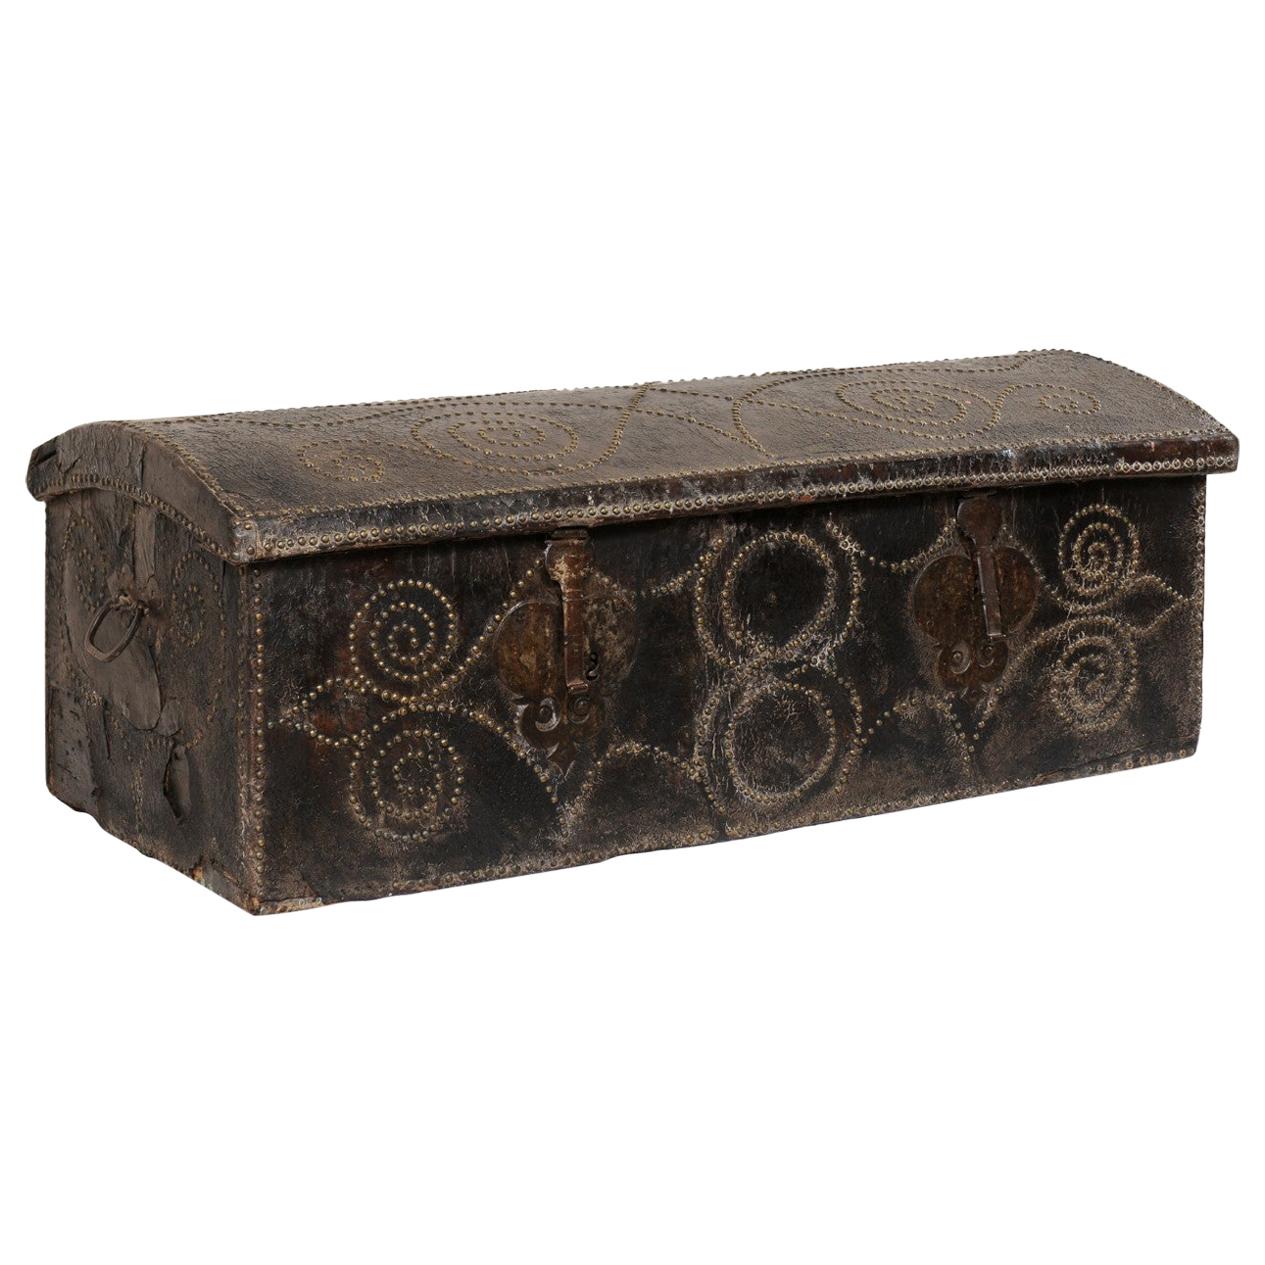 Spanish Leather-Wrapped Coffer with Nail Head Decor Trimmings